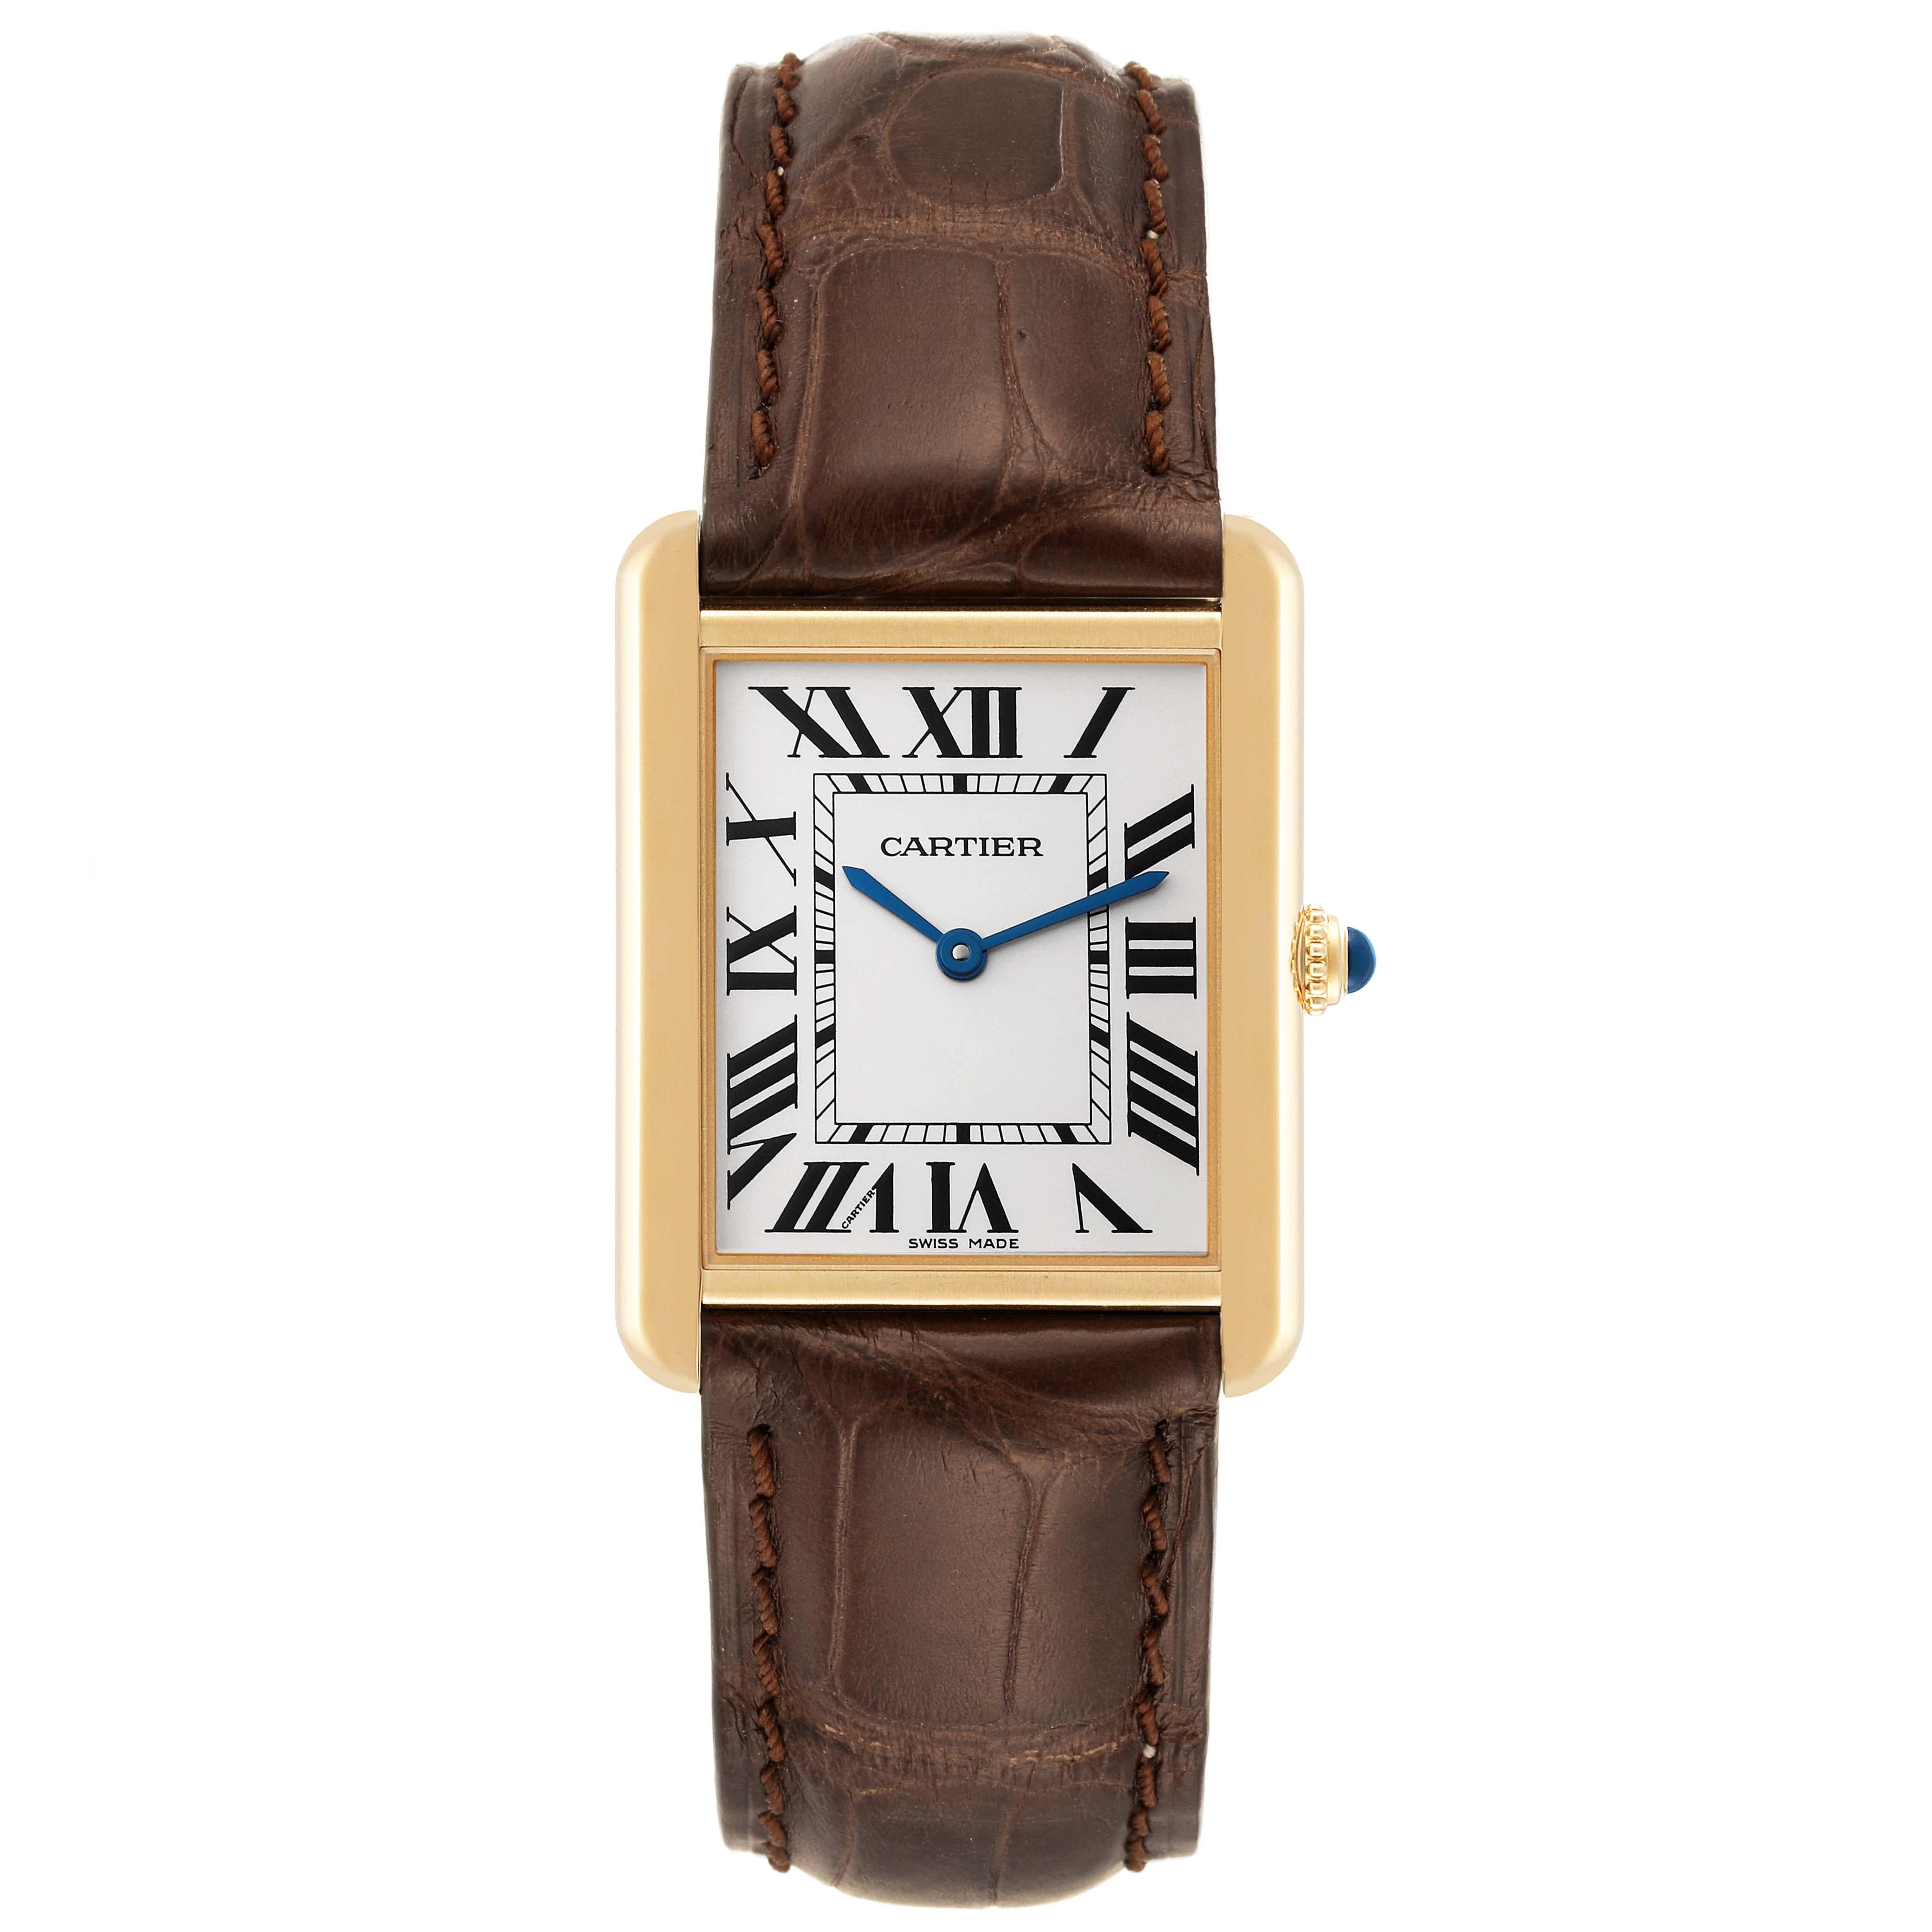 Cartier Tank Solo Large Yellow Gold Steel Mens Watch W5200004. Quartz movement. 18k yellow gold case 34 mm x 27 mm. Stainless steel case back. Circular grained crown set with a blue spinel cabochon. . Scratch resistant sapphire crystal. Silver